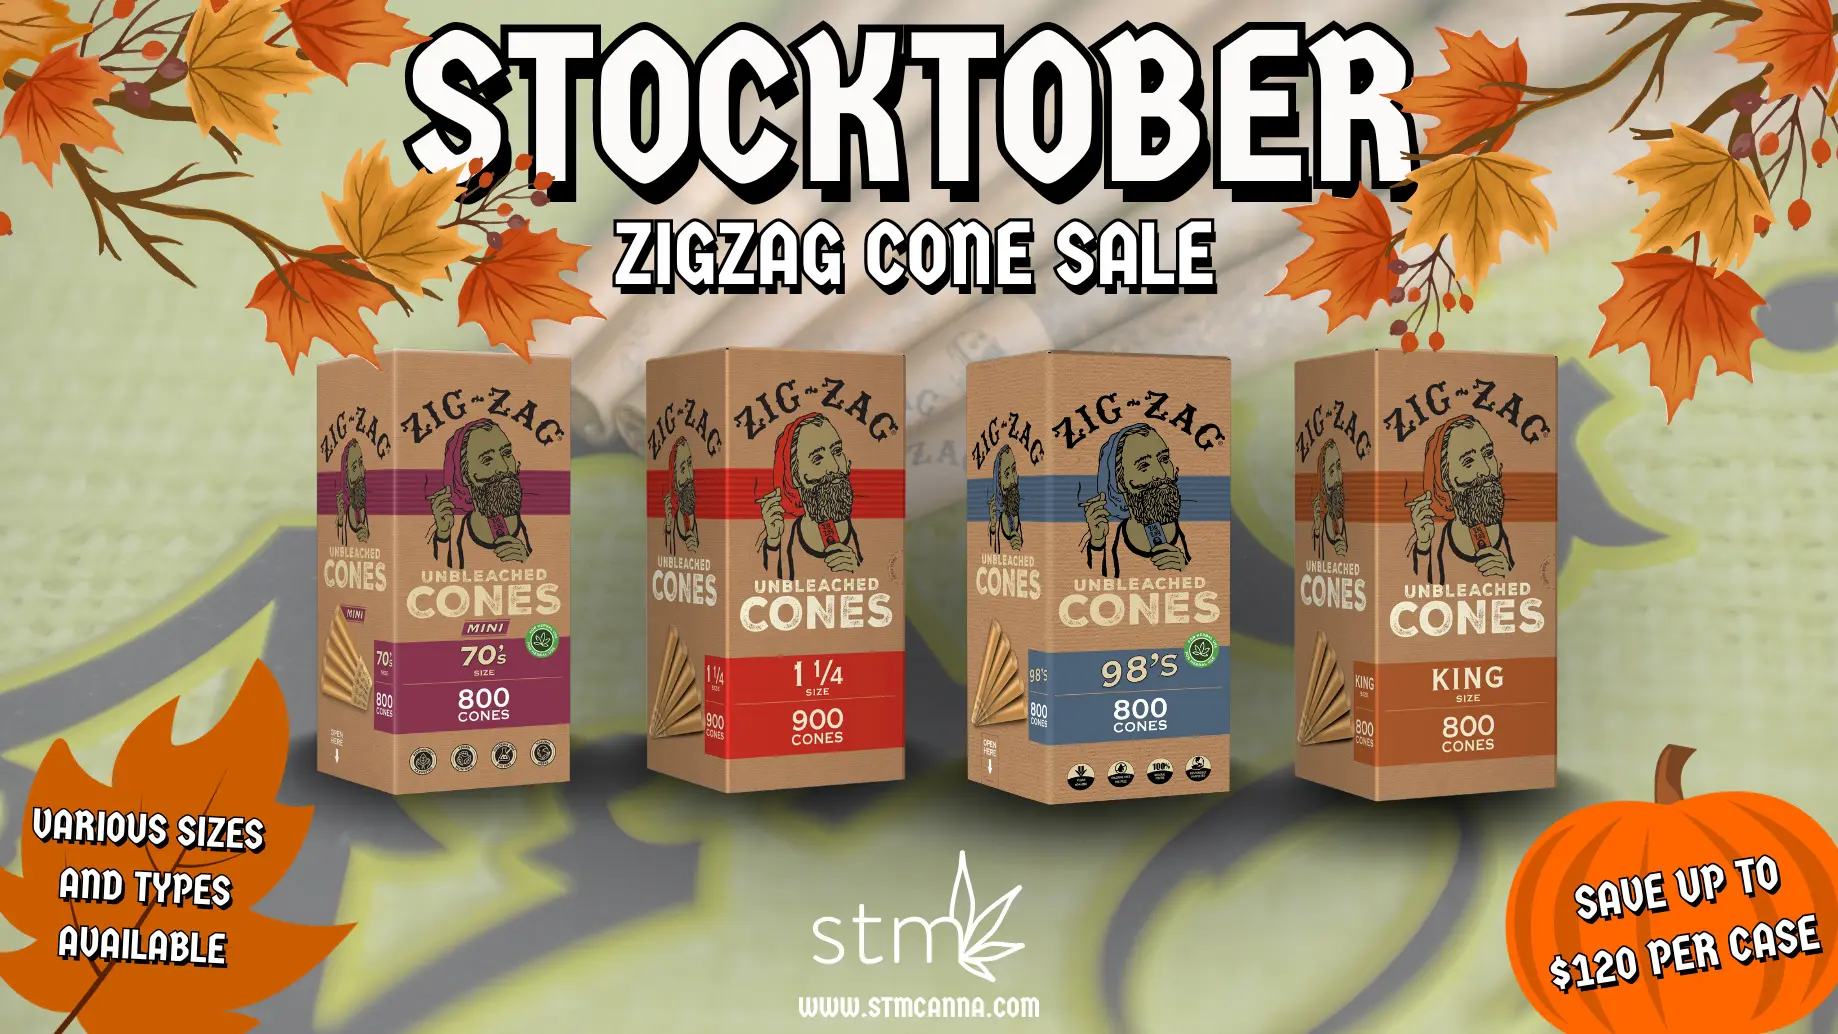 Load Up on Cones w/ Our “Stocktober” Zig Zag Sale!